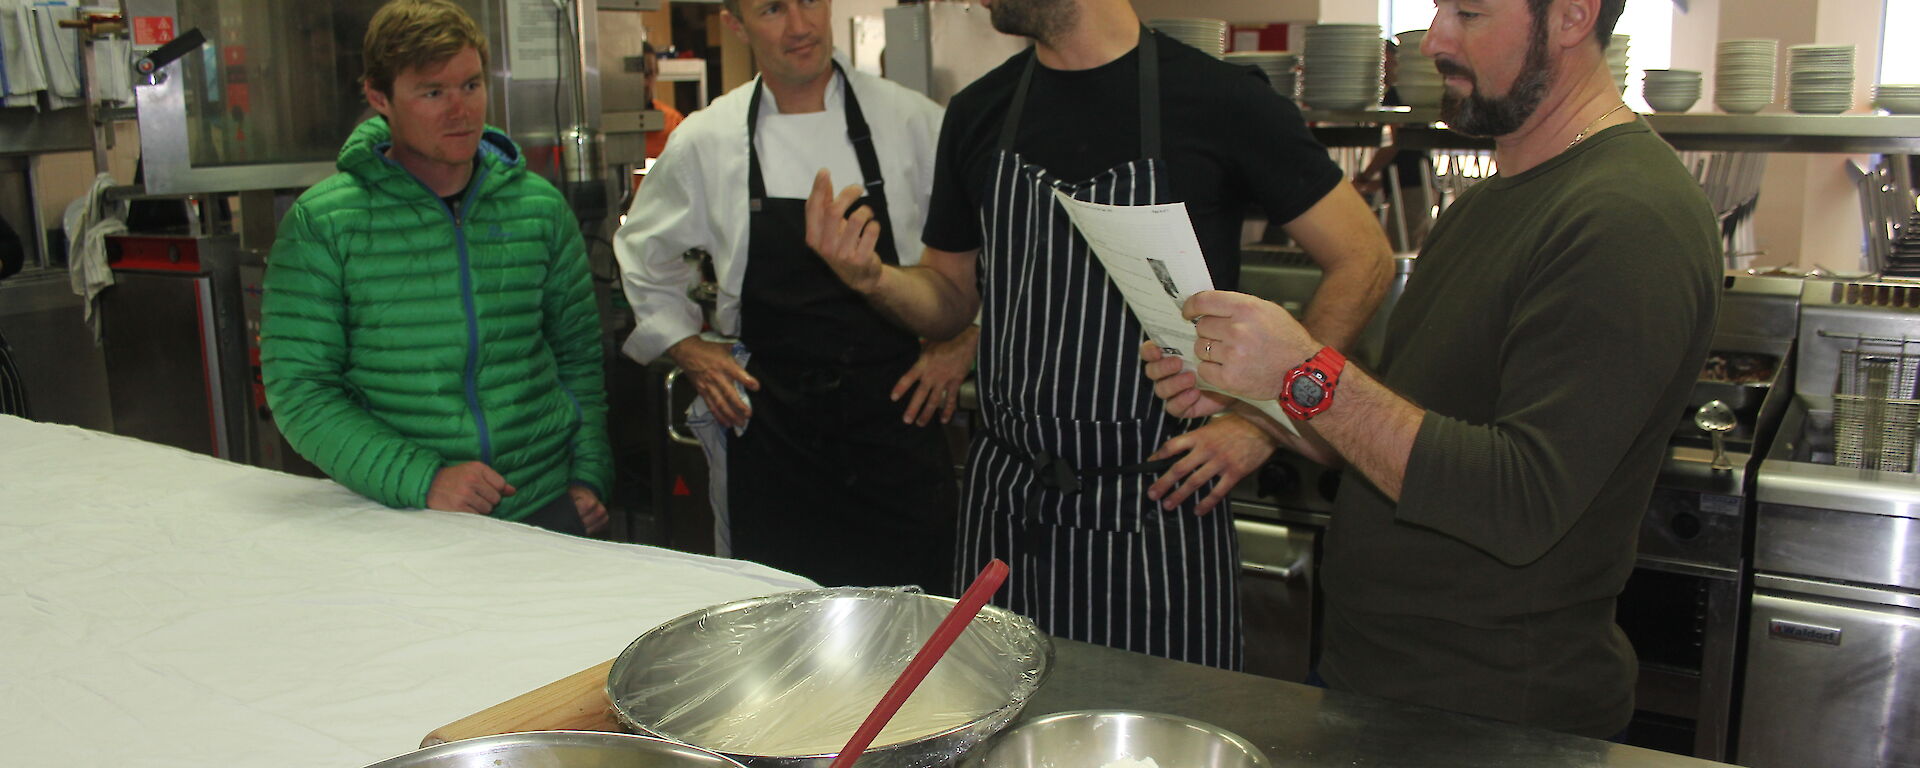 Two chefs showing a number of expeditioners how to cook